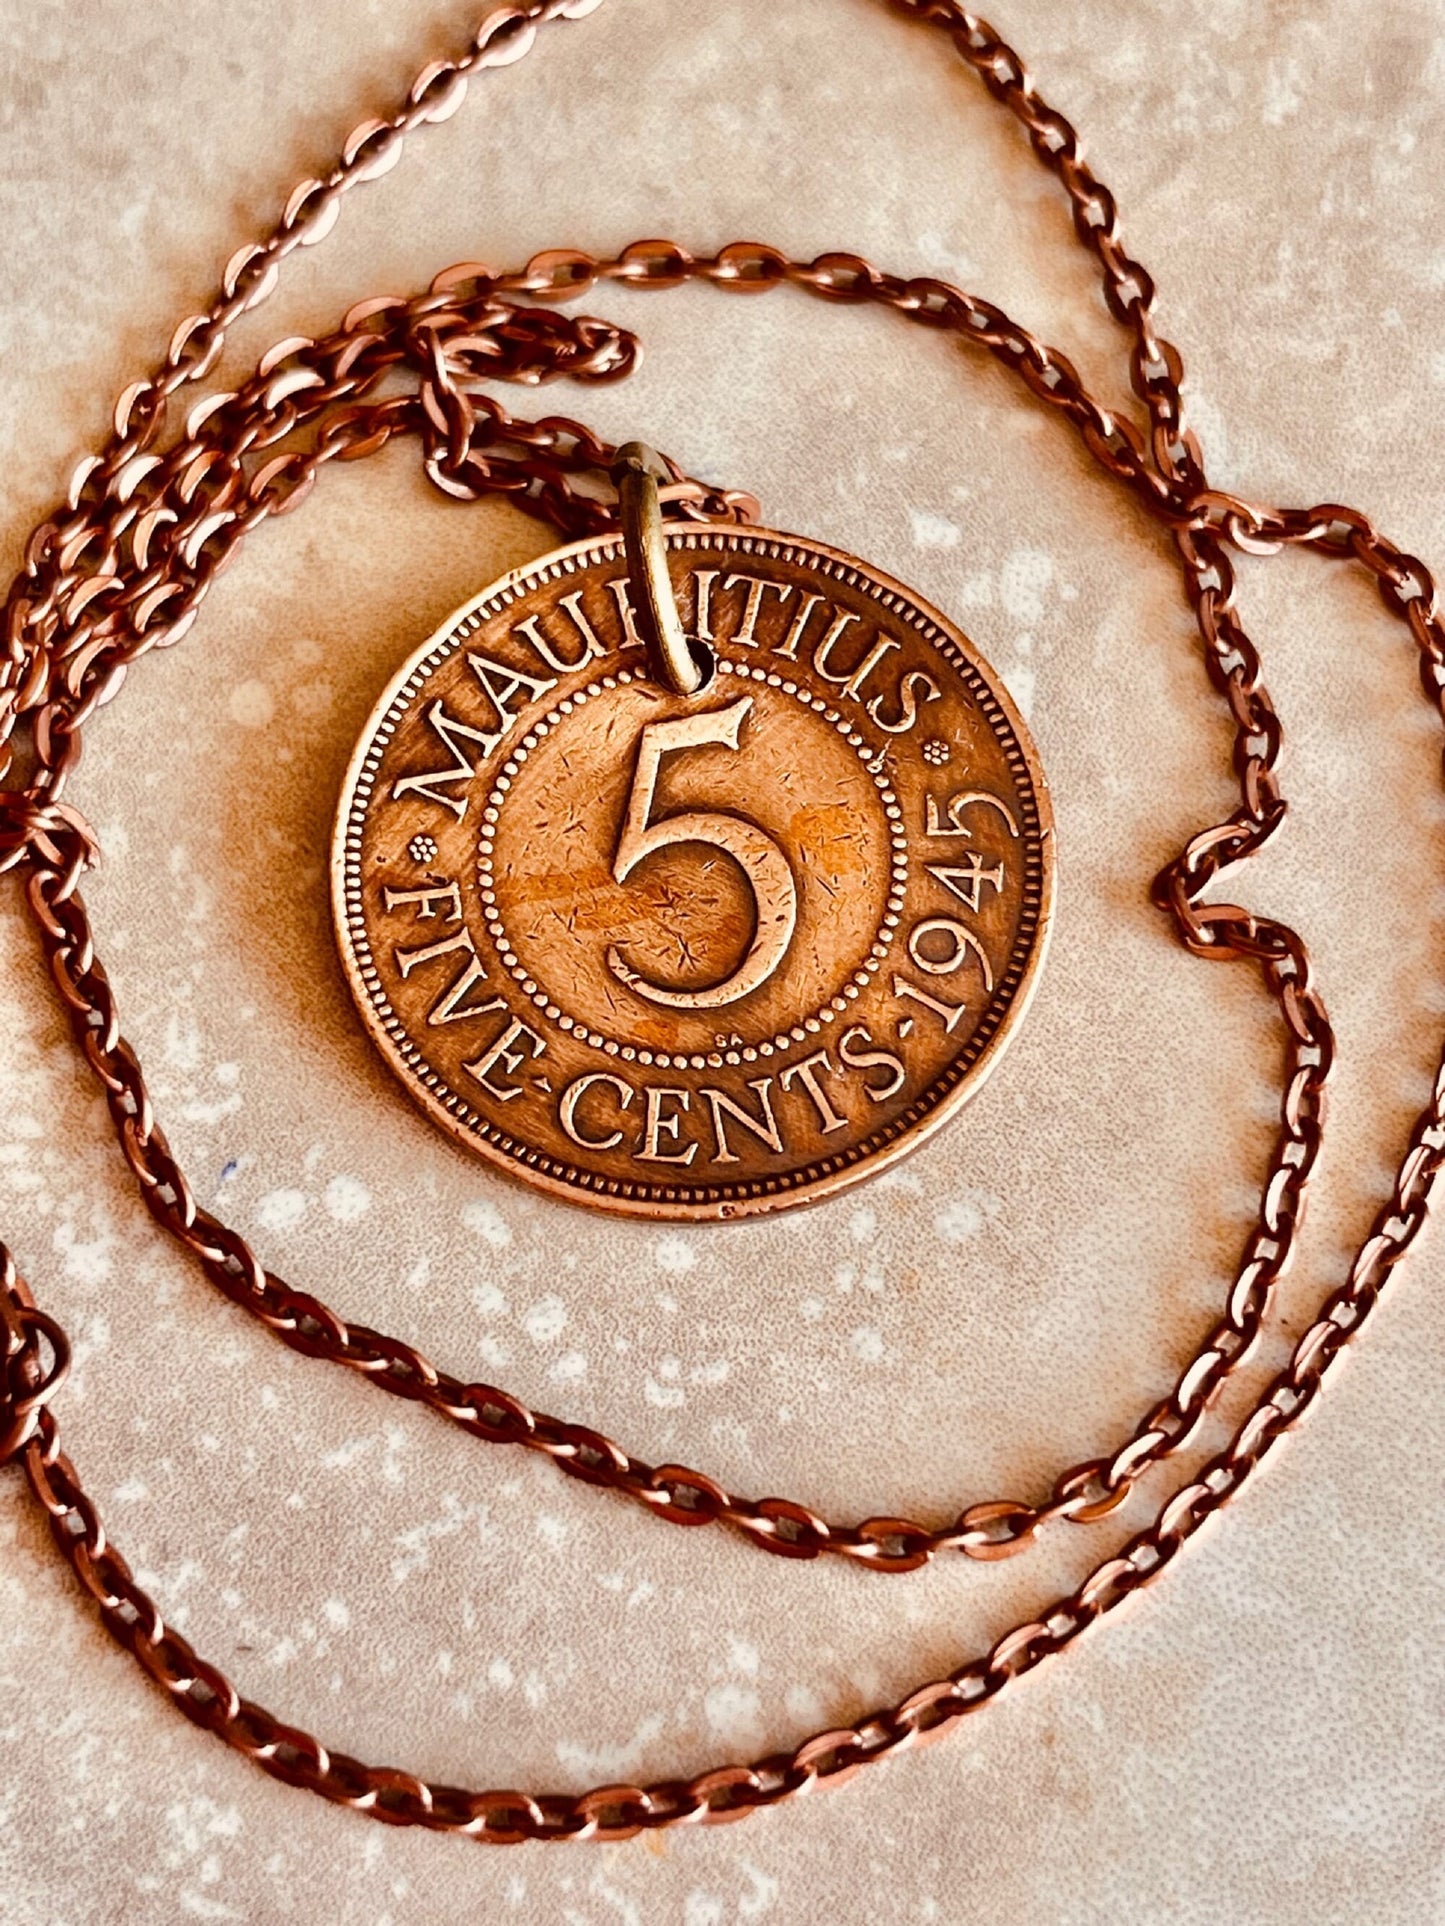 Mauritius 5 Cents Coin Pendant African Personal Necklace Vintage Handmade Jewelry Gift Friend Charm For Him Her World Coin Collector